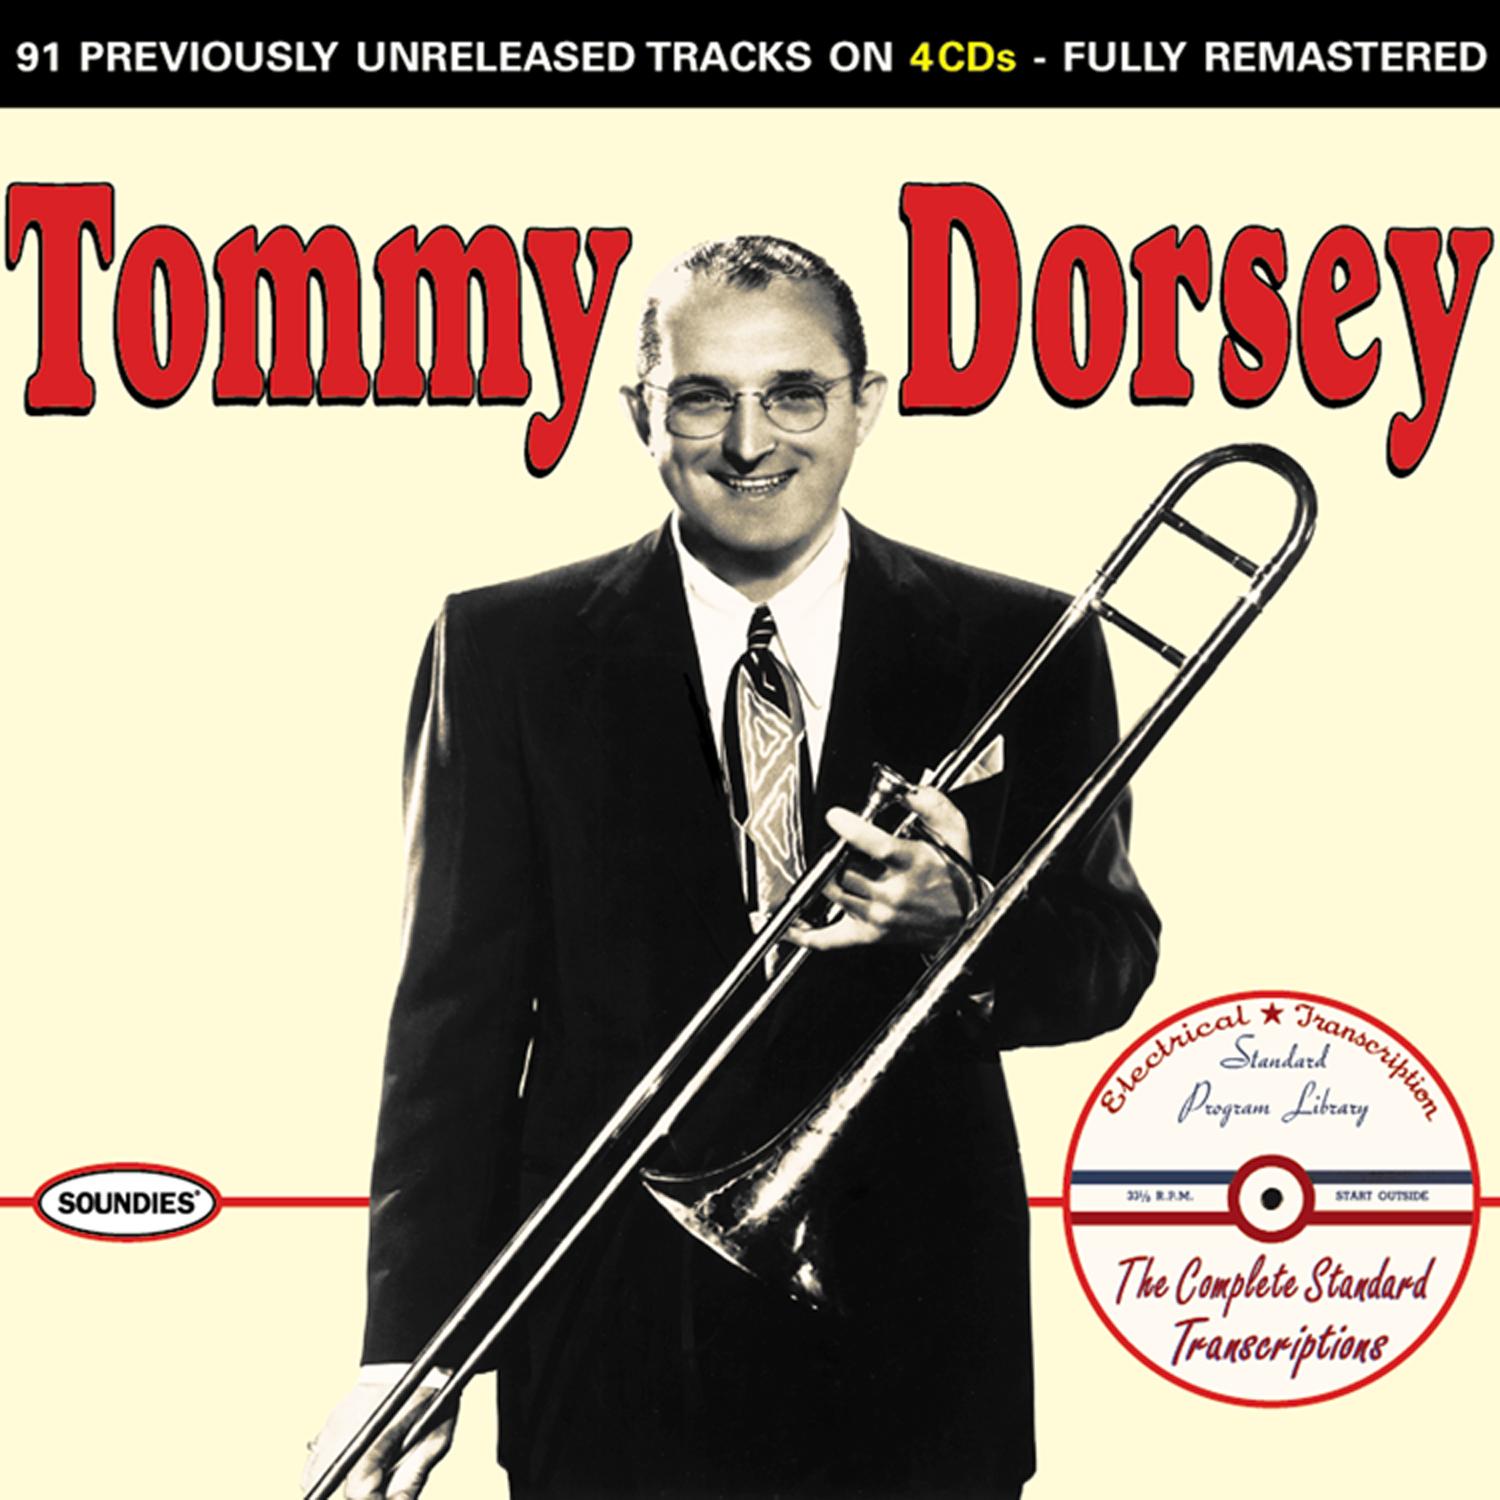 Tommy Dorsey: The Complete Standard Transcriptions